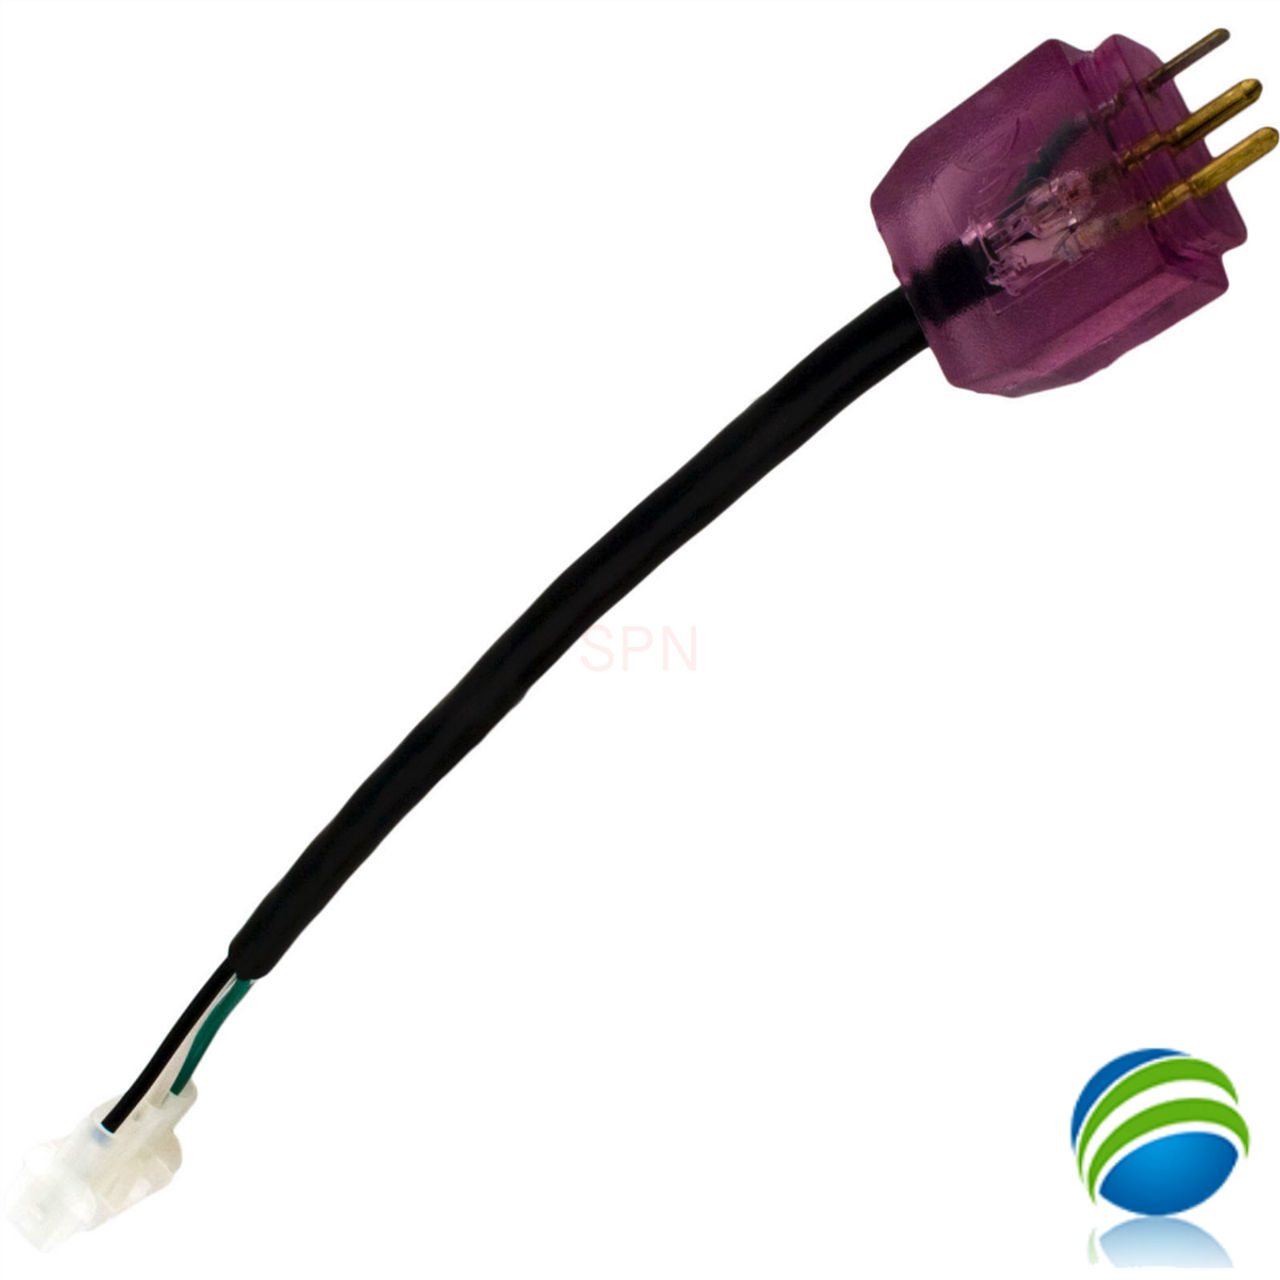 Blower Adapter Cord, 4 Pin AMP to MJJ, Violet, 6"-1701405073